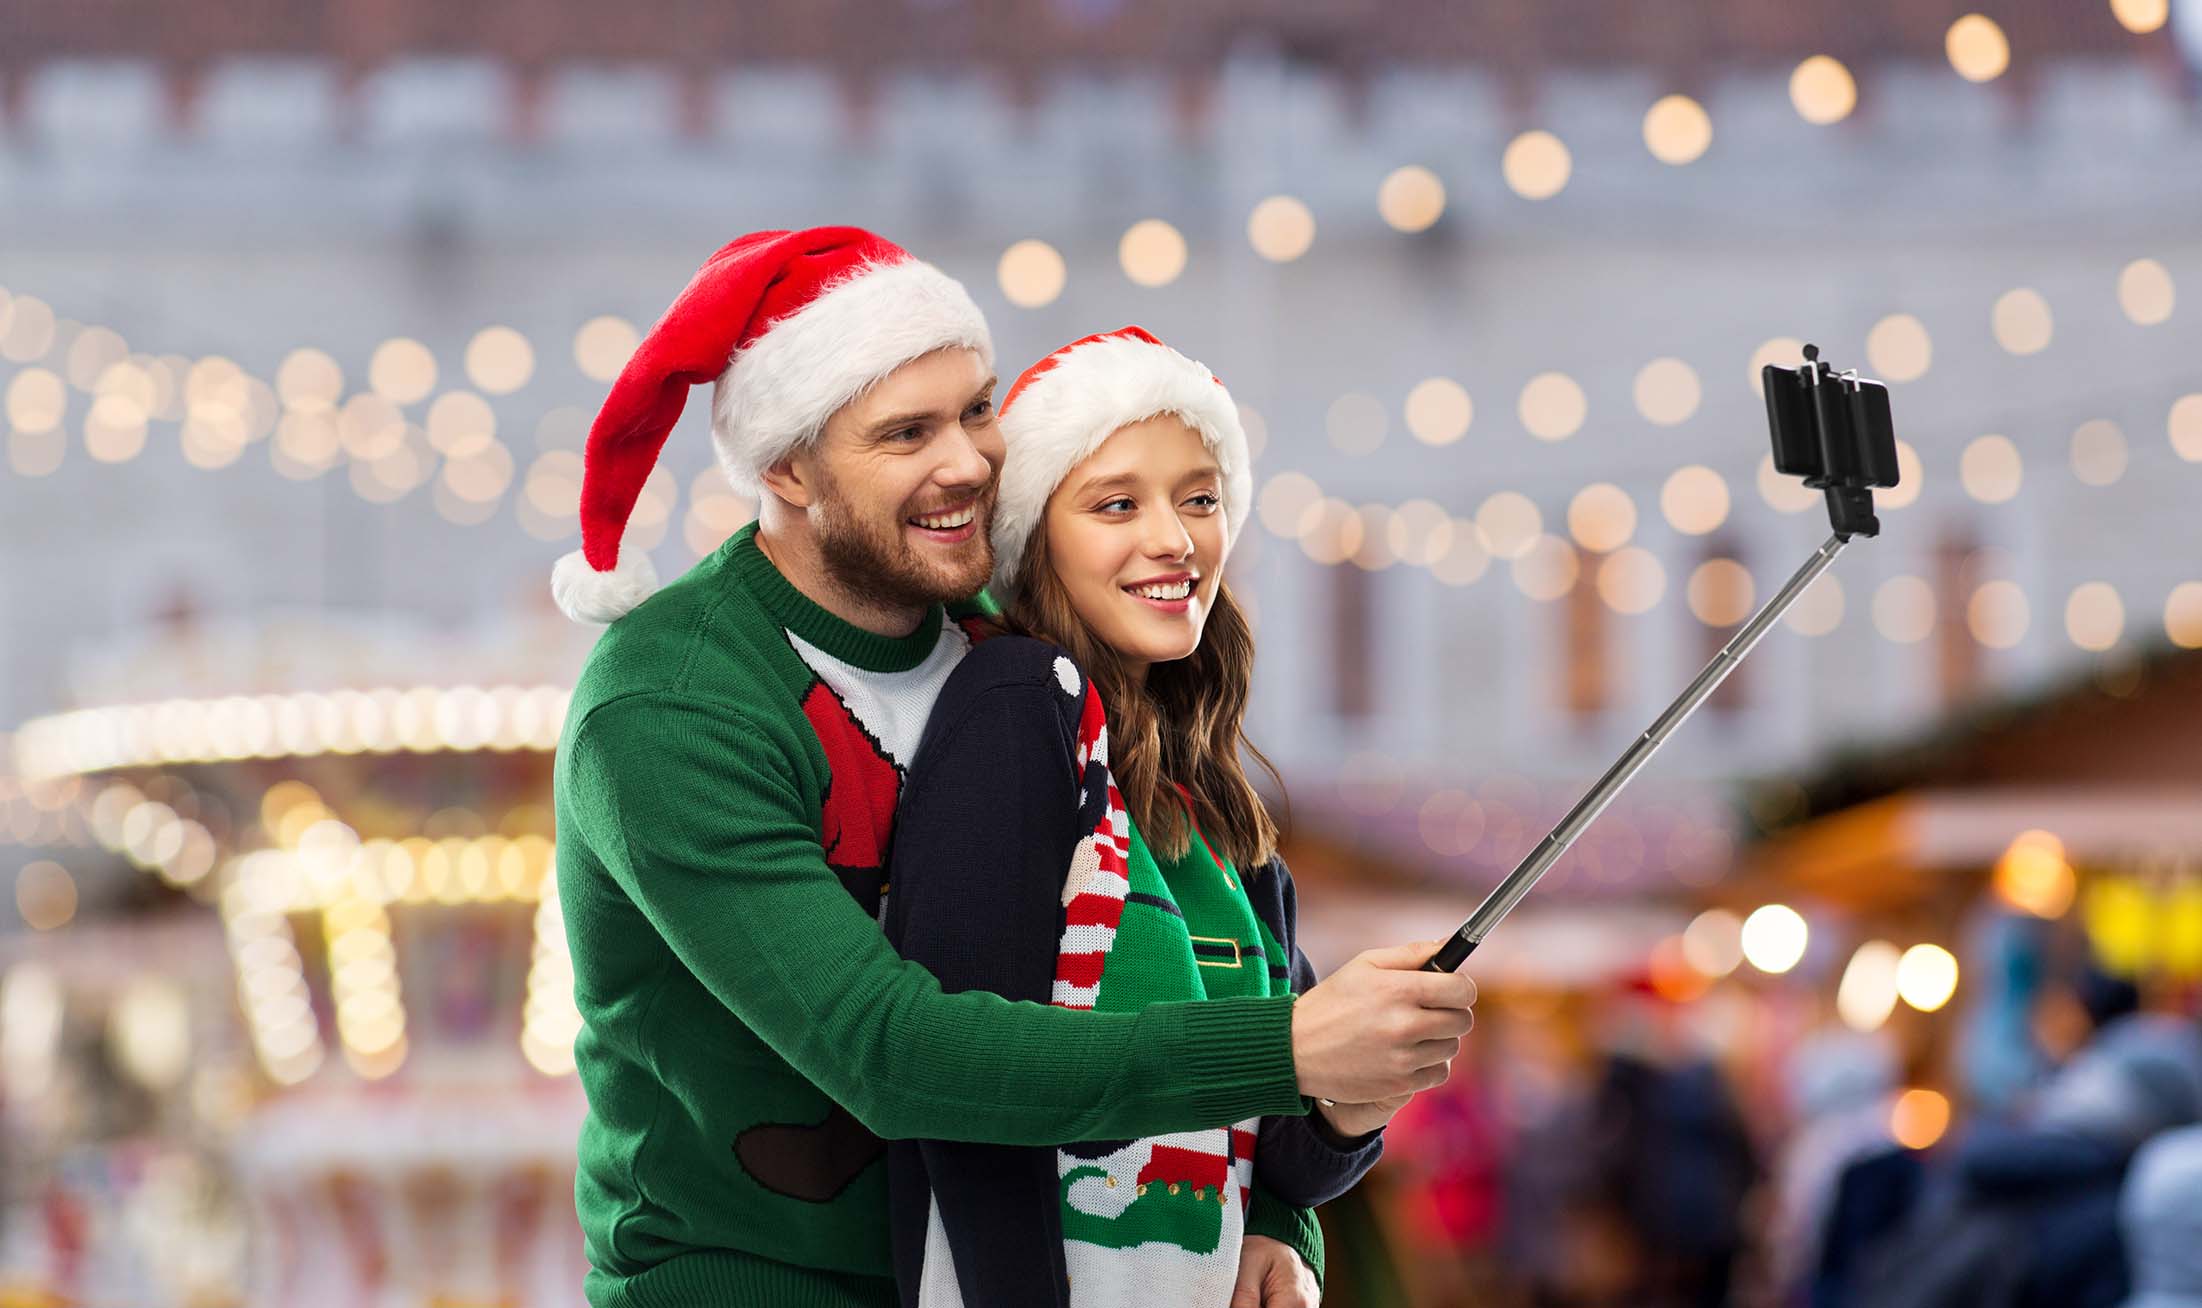 Couple using self stick to get content ready for holiday social media trends